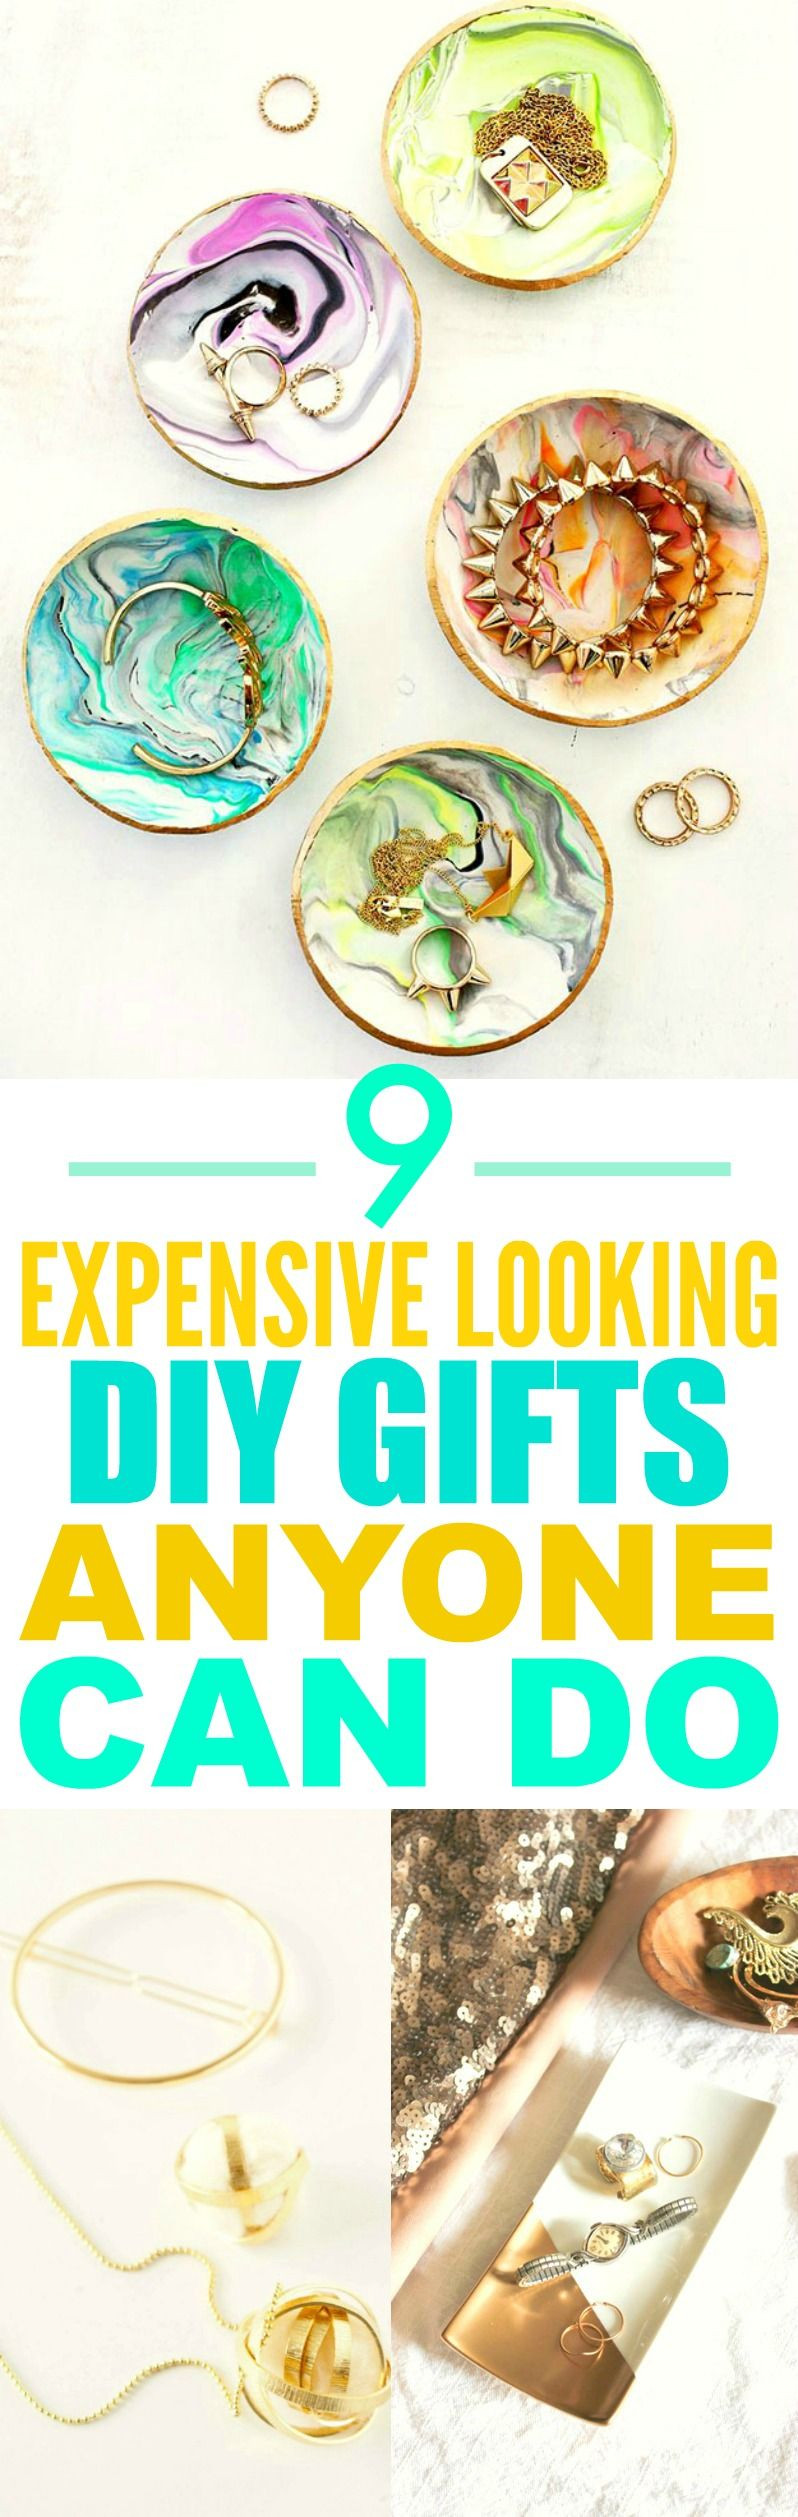 Easy Craft Gift Ideas
 9 Expensive Looking Easy DIY Gifts Gift Ideas